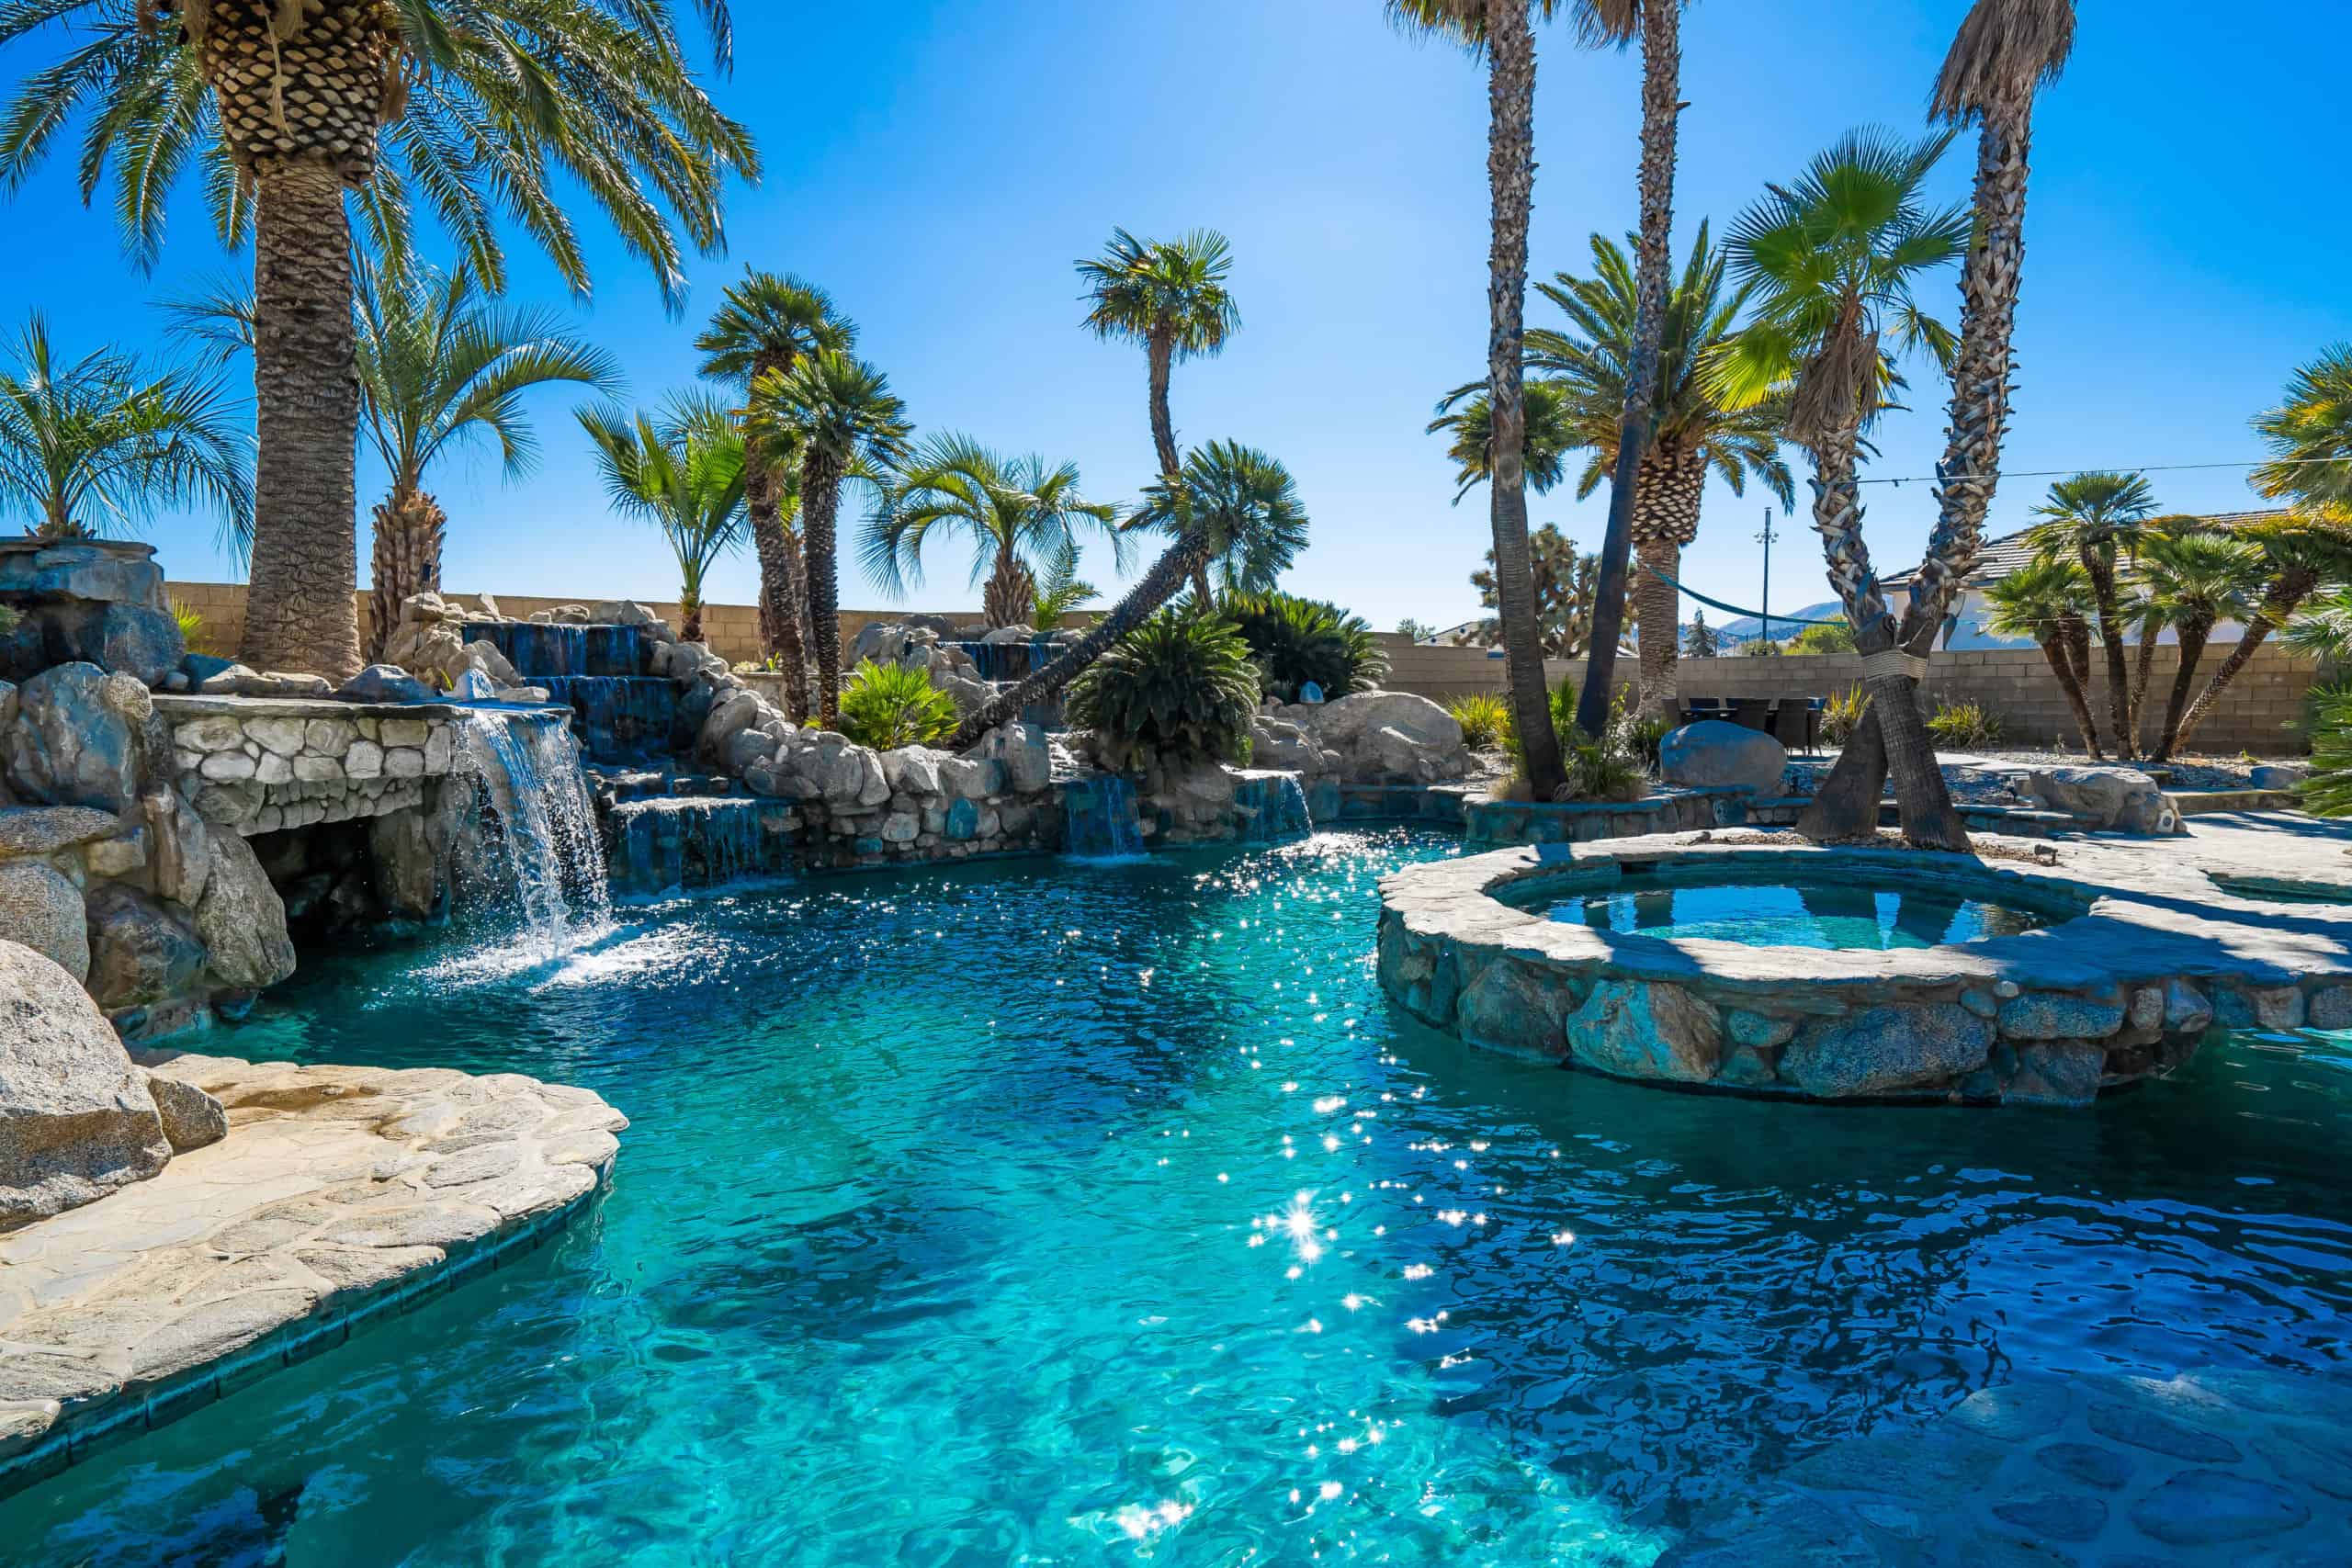 Cycles of Change Recovery Services in Palmdale California poolside